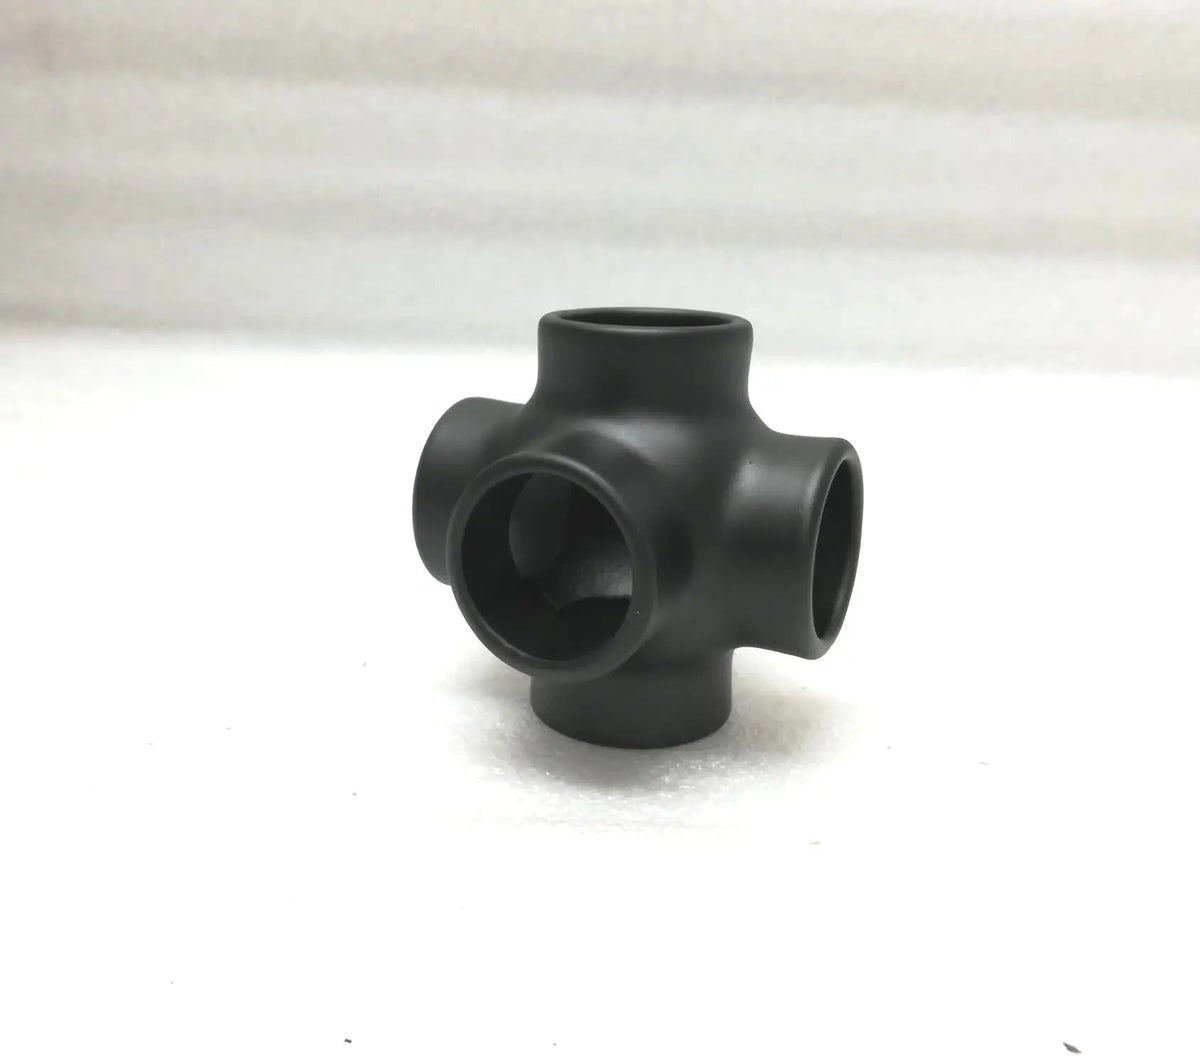 Ball Side Outlet Cross for 1" Tubing Ball Fittings, Components for 1" Od Tubing MatteBlackPowderCoatedFinish Trade Diversified